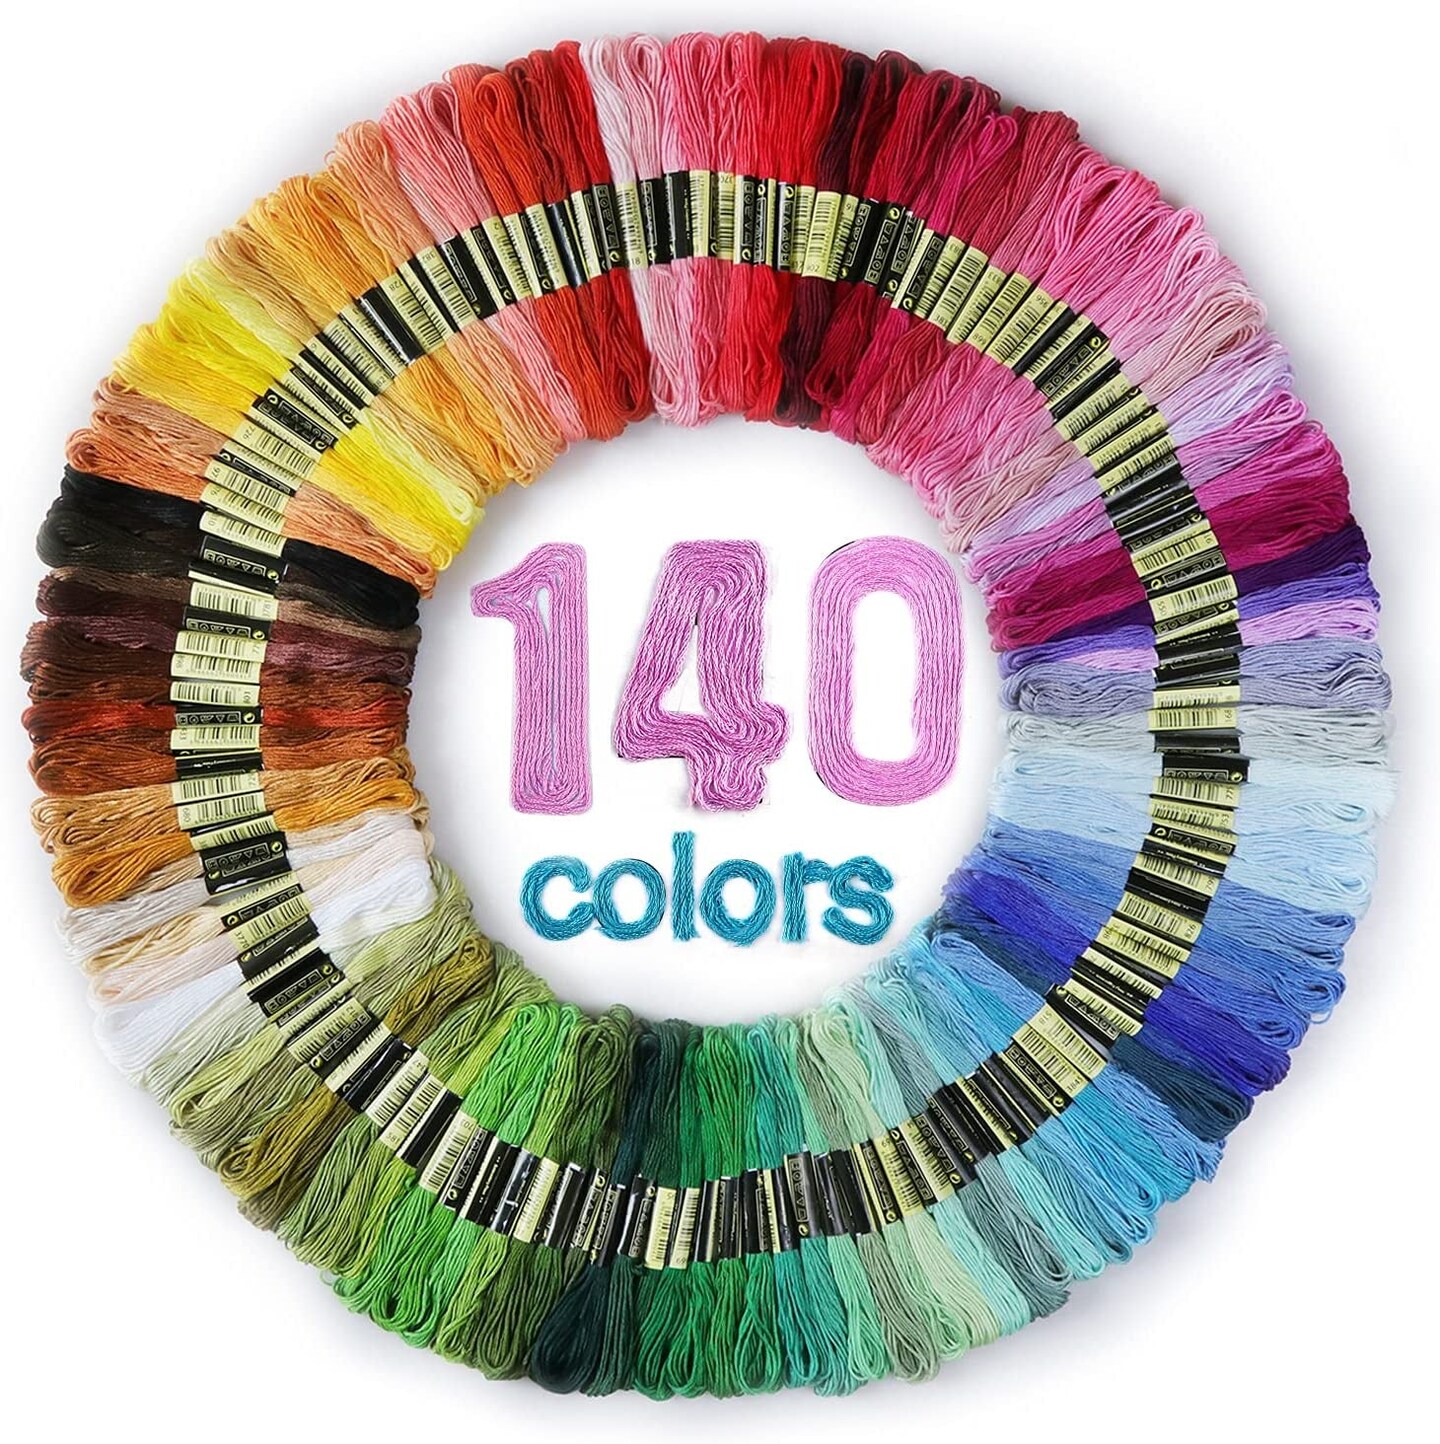 Premium Rainbow Color Embroidery Floss with Cotton for Cross